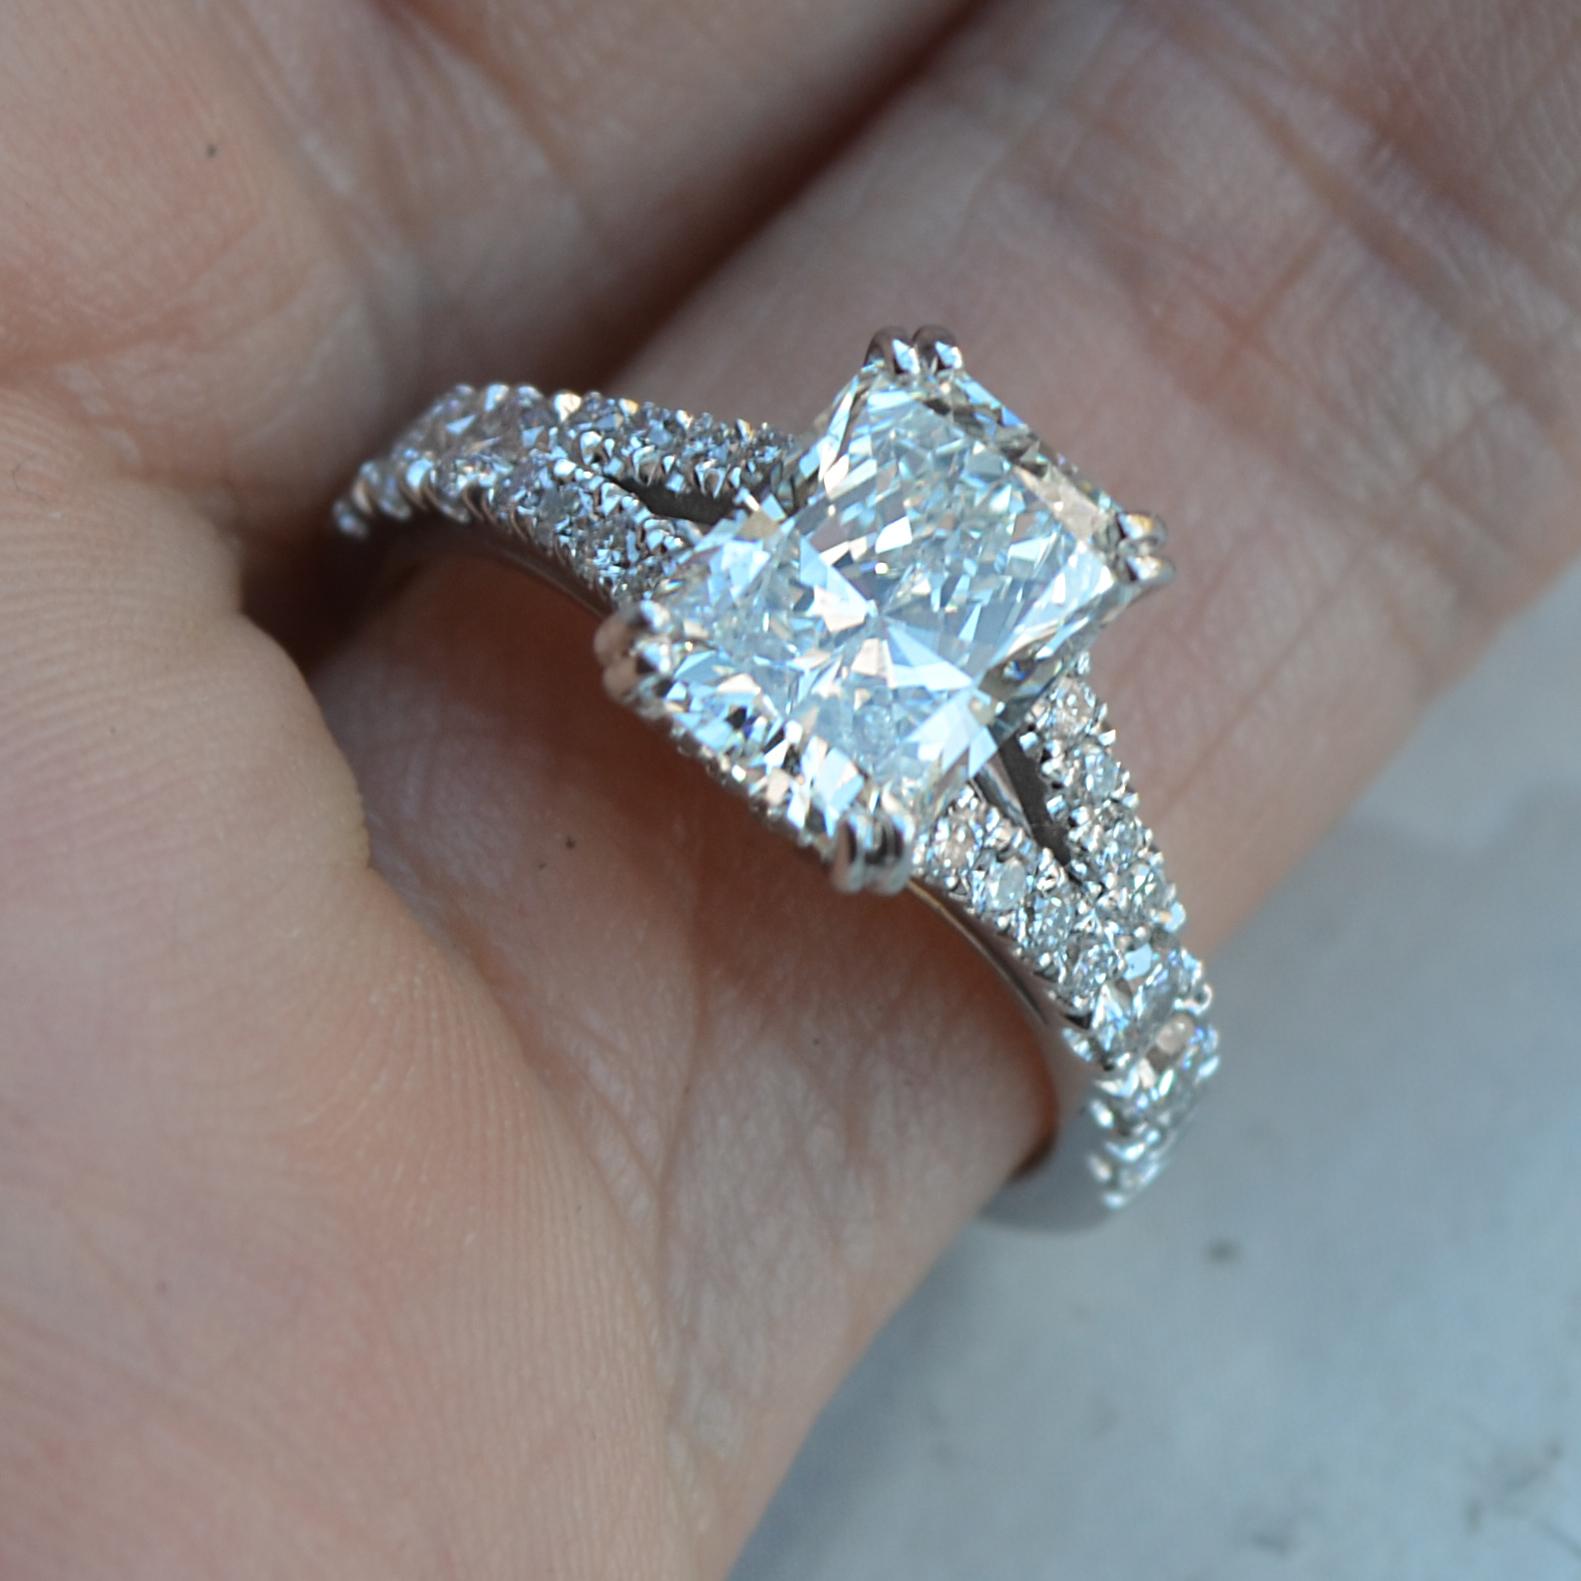 Can be sized to any finger size, ring will be made to order and take approximately 3-6  business weejs.

Price shown is for diamond with the ring in your size, if you want to use your own diamond or a different one to change the price please message